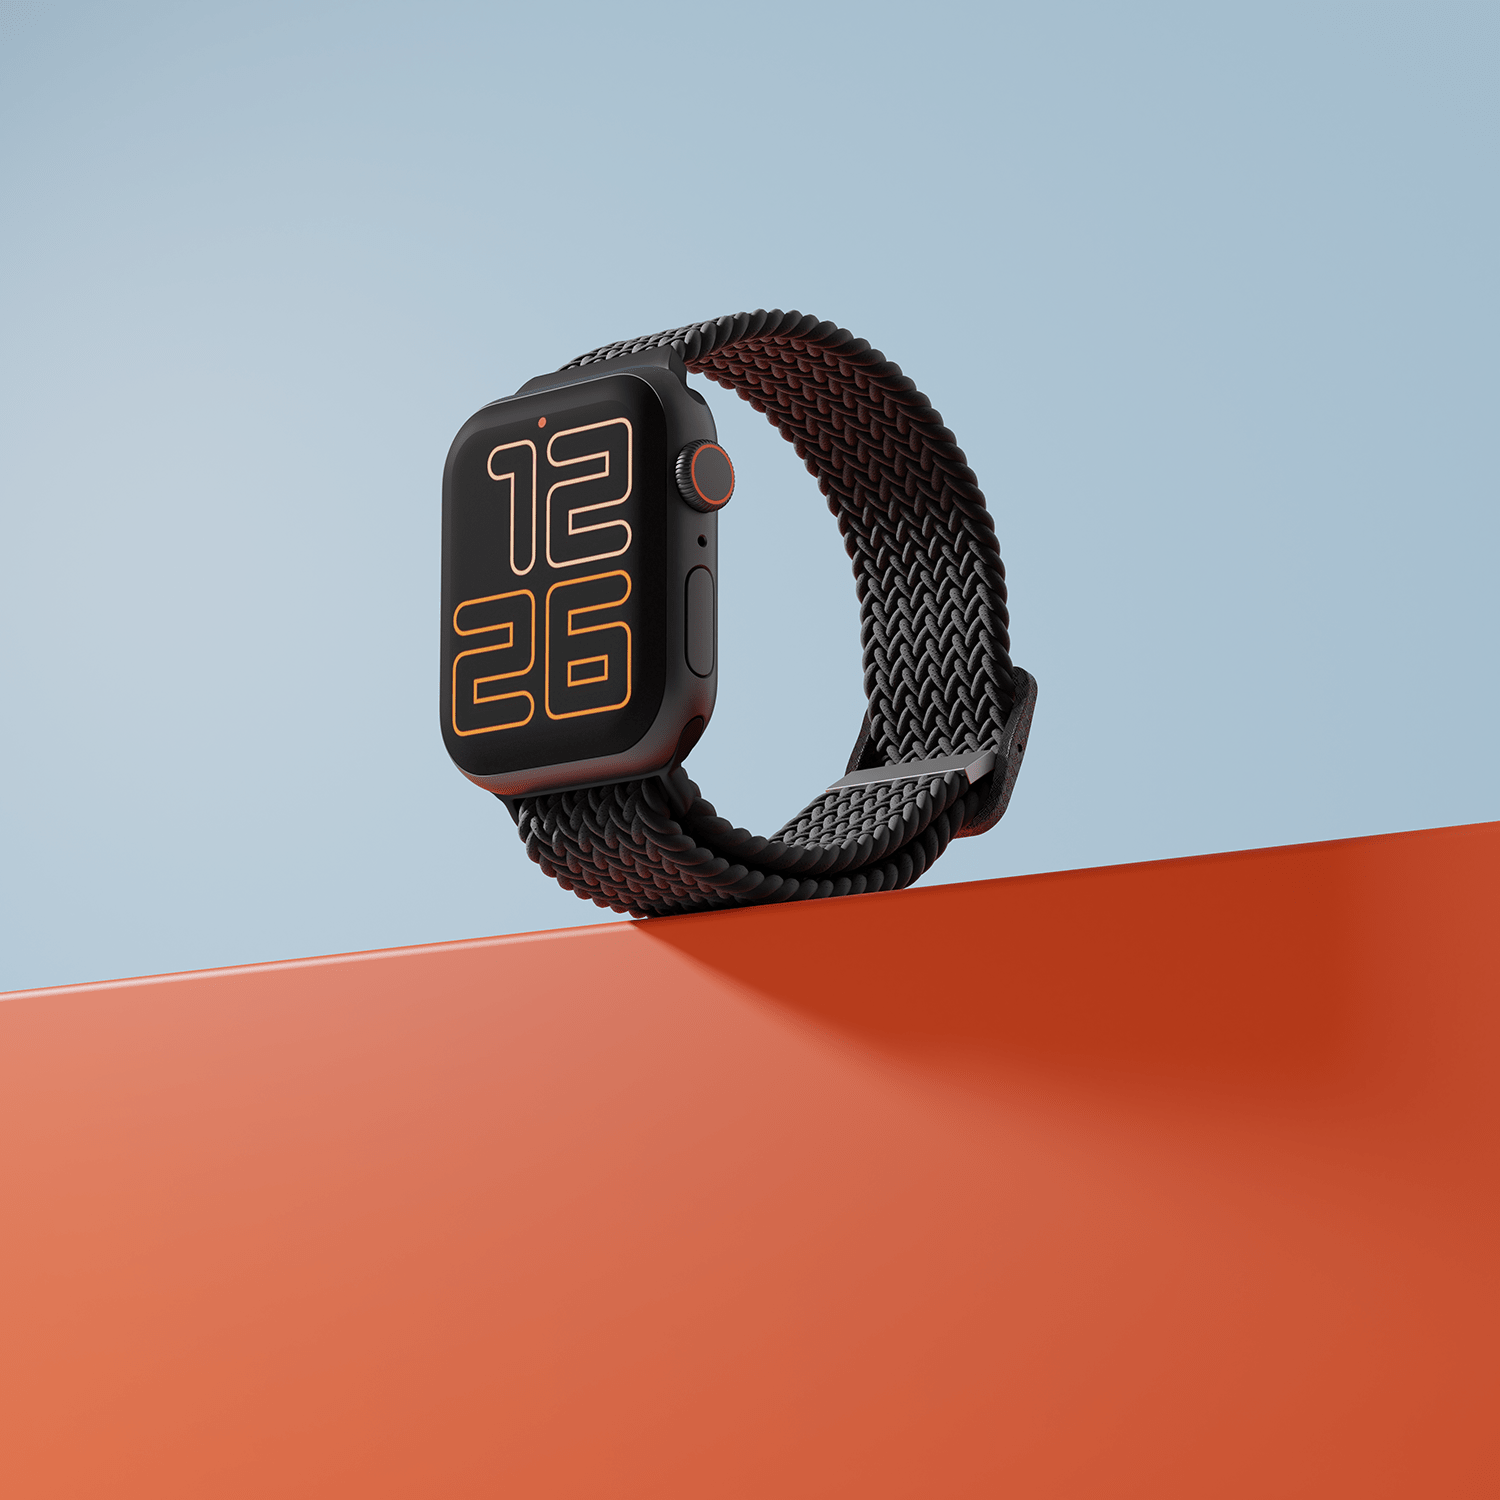 Smartwatch with braided loop on orange surface against blue background.